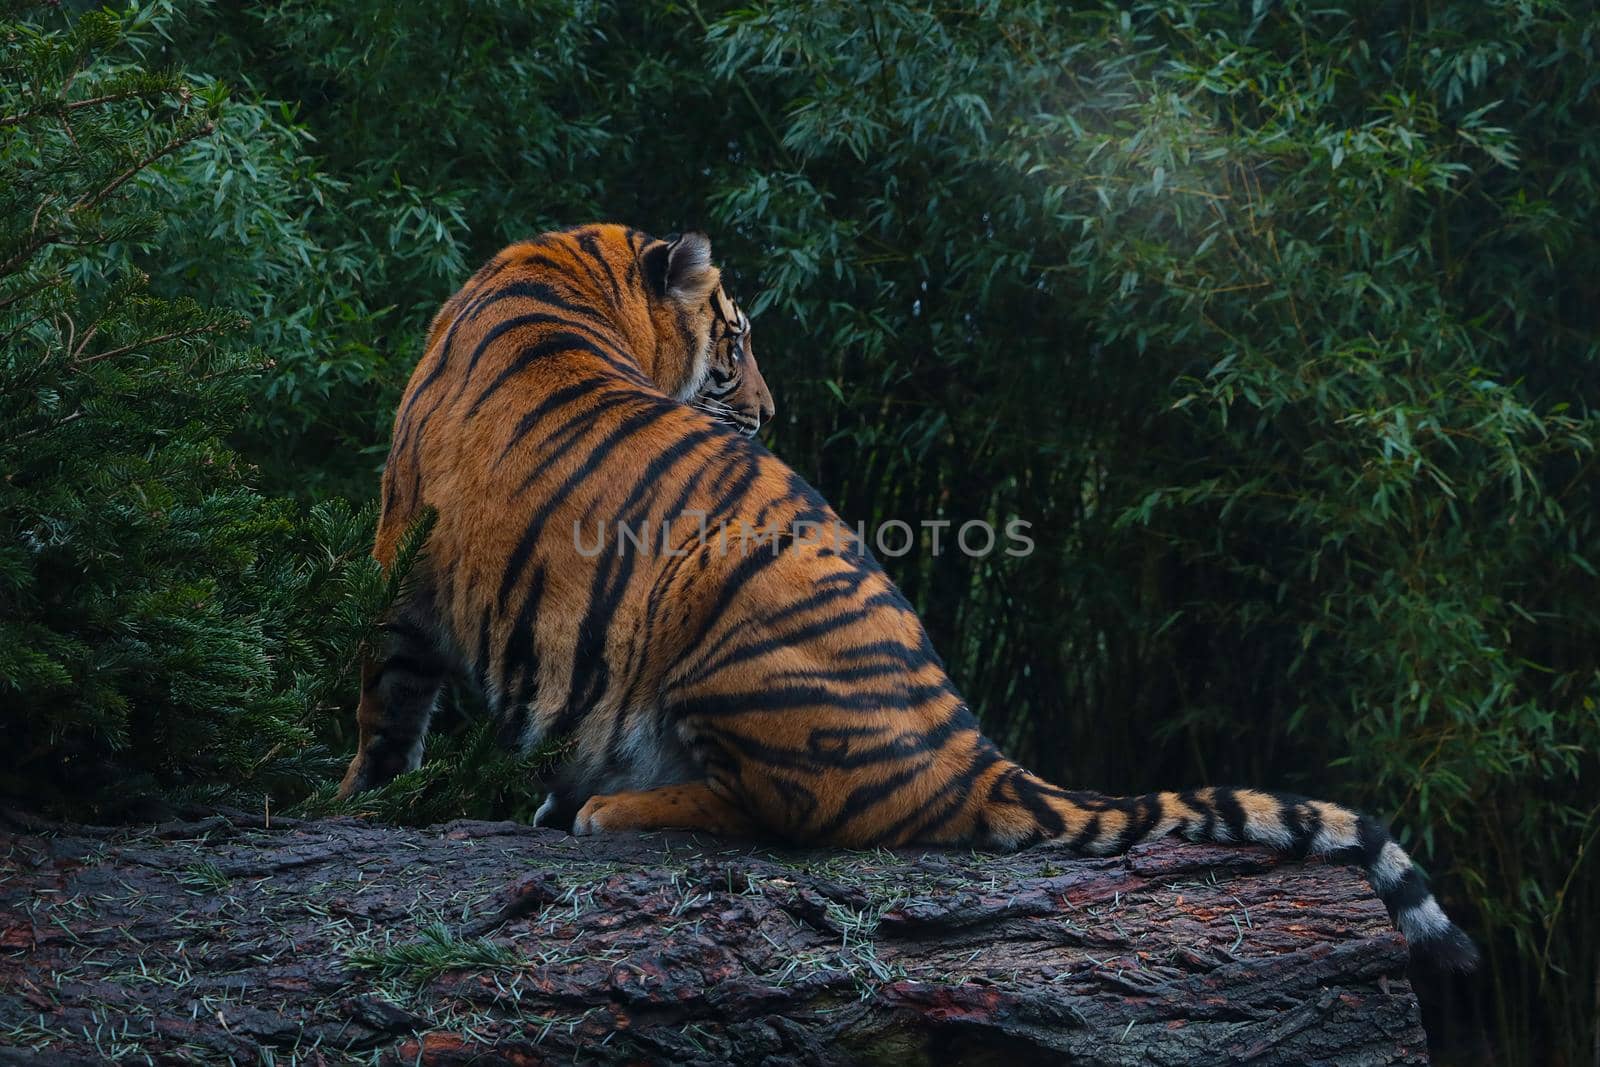 On the trunk of the tree sits a beautiful tiger, wildlife